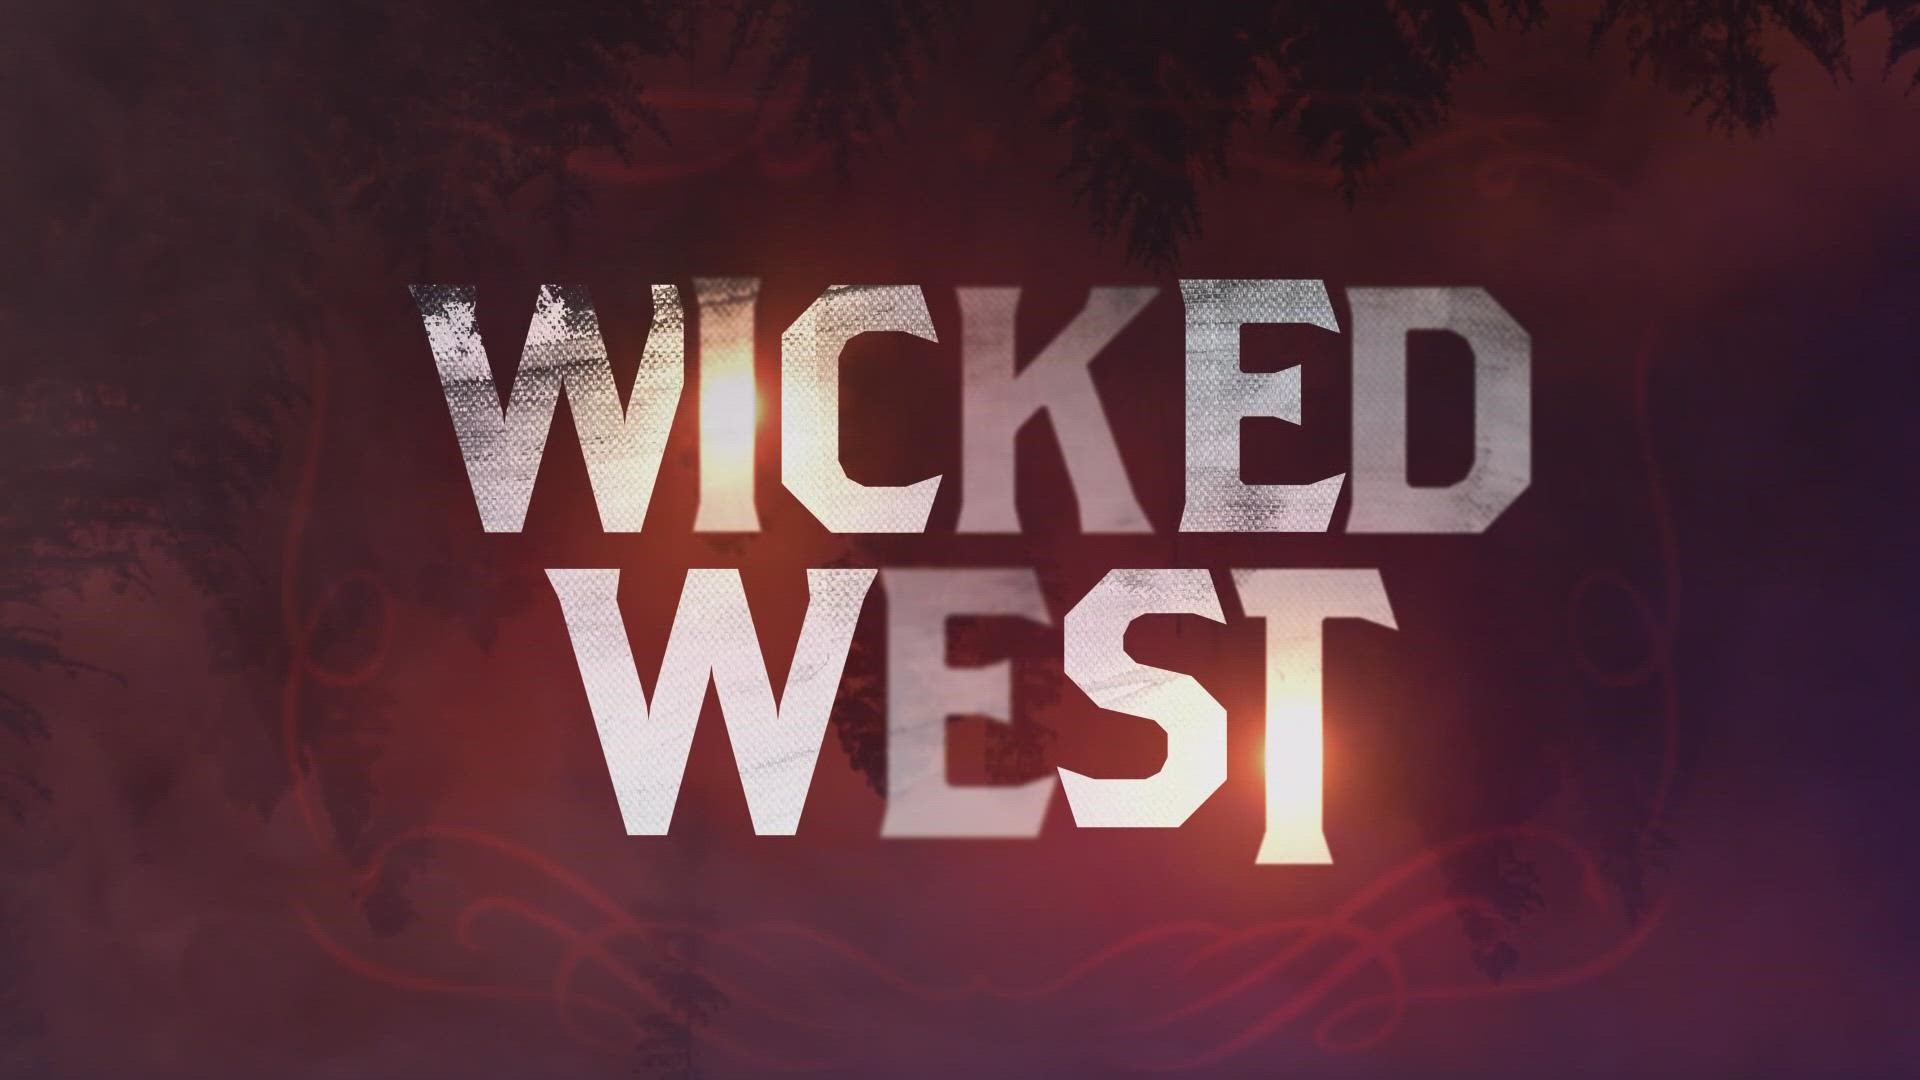 KGW's special series, Wicked West, explores the mysterious folklore of the Pacific Northwest and tales of old time crime.